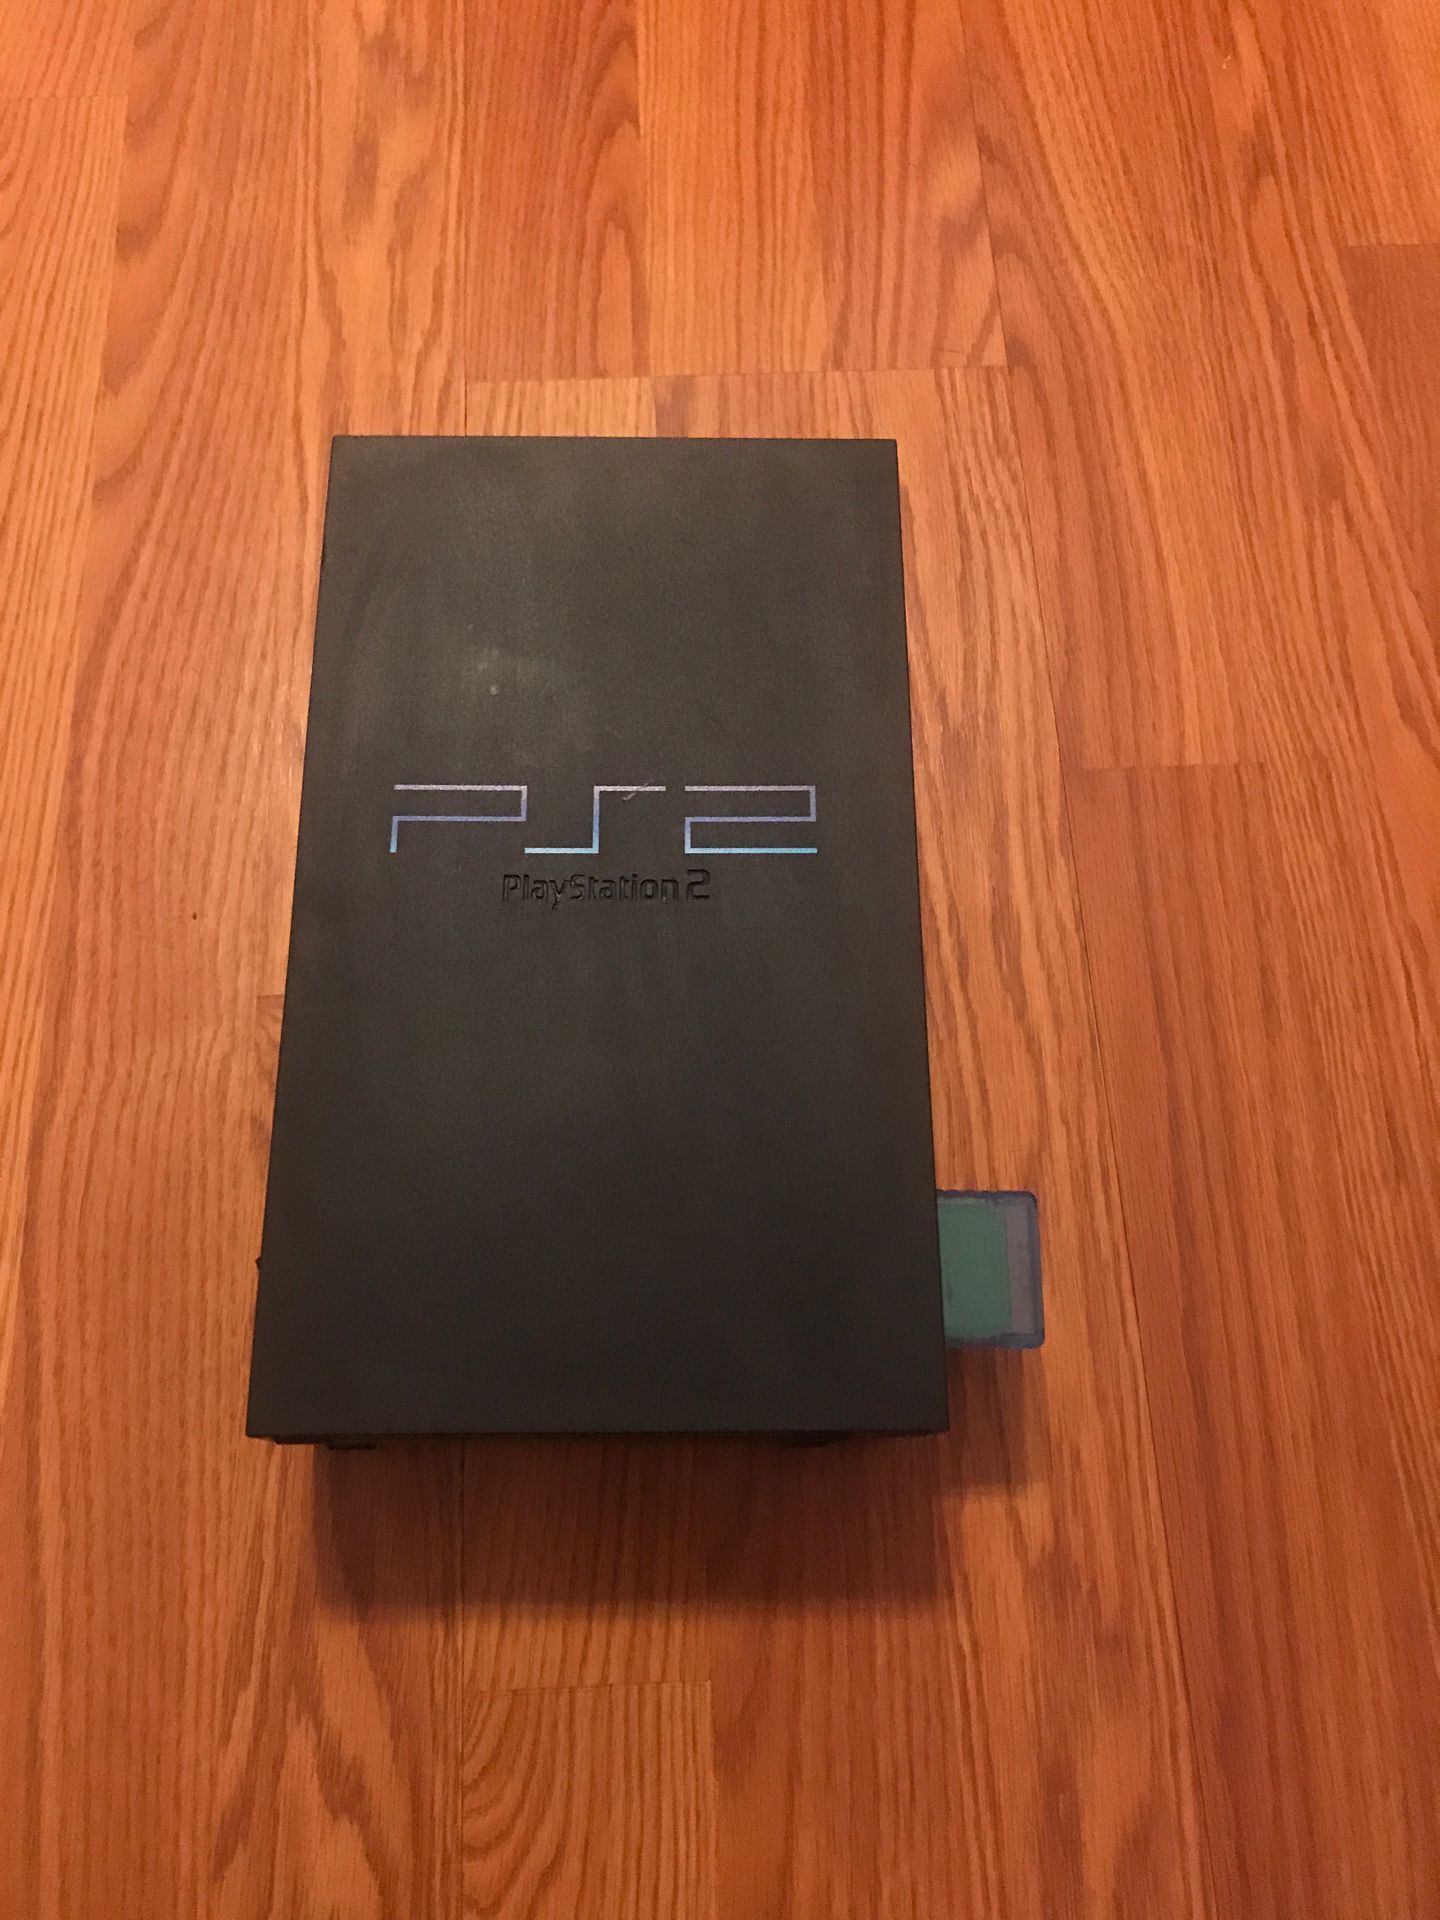 Original PS2 with One Controller, and all cables